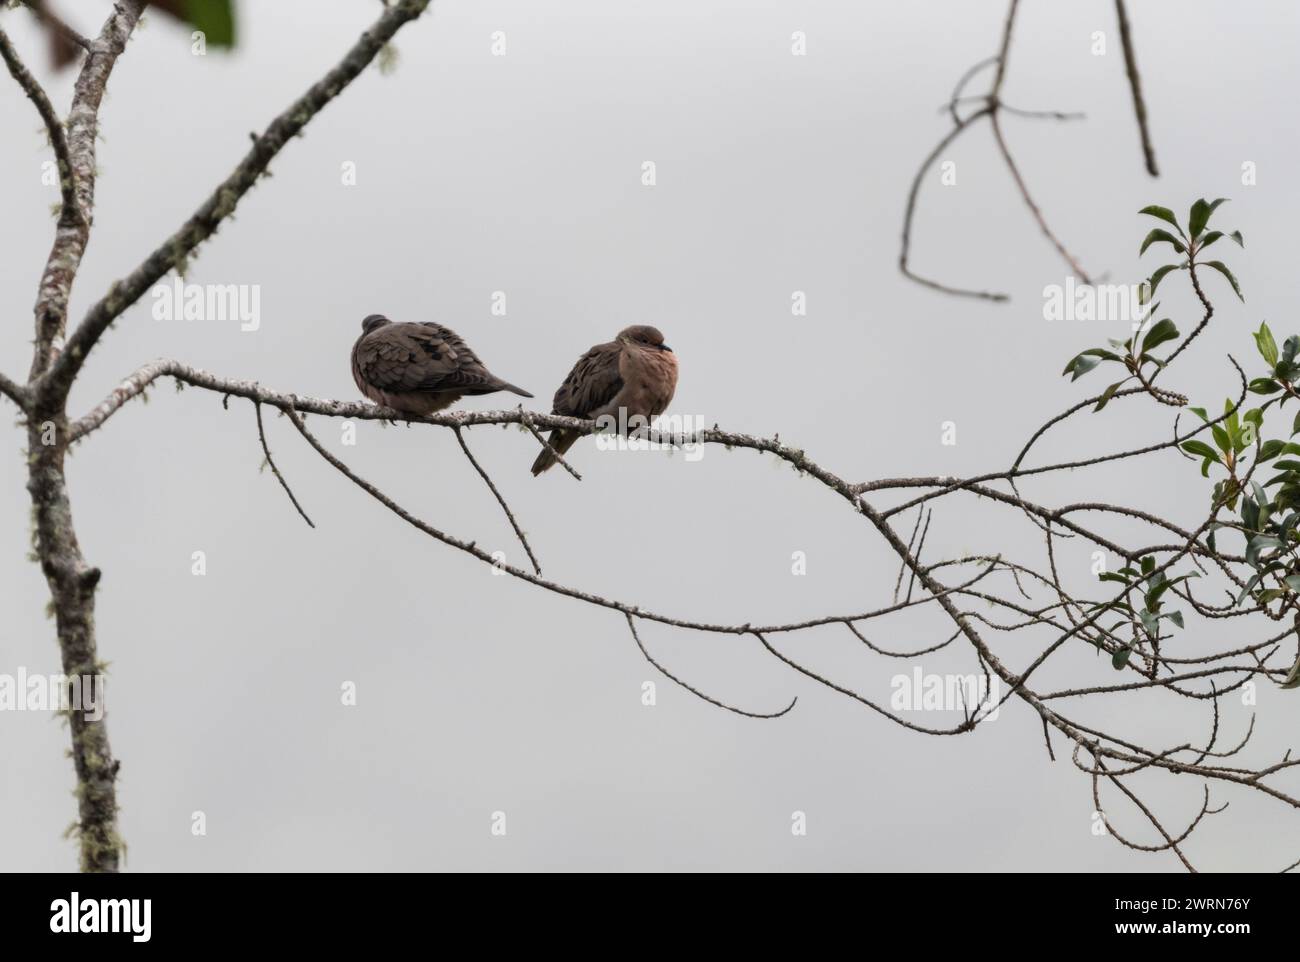 Pair of Eared Doves (Zenaida auriculata) perched in a tree near Jardin, Colombia Stock Photo